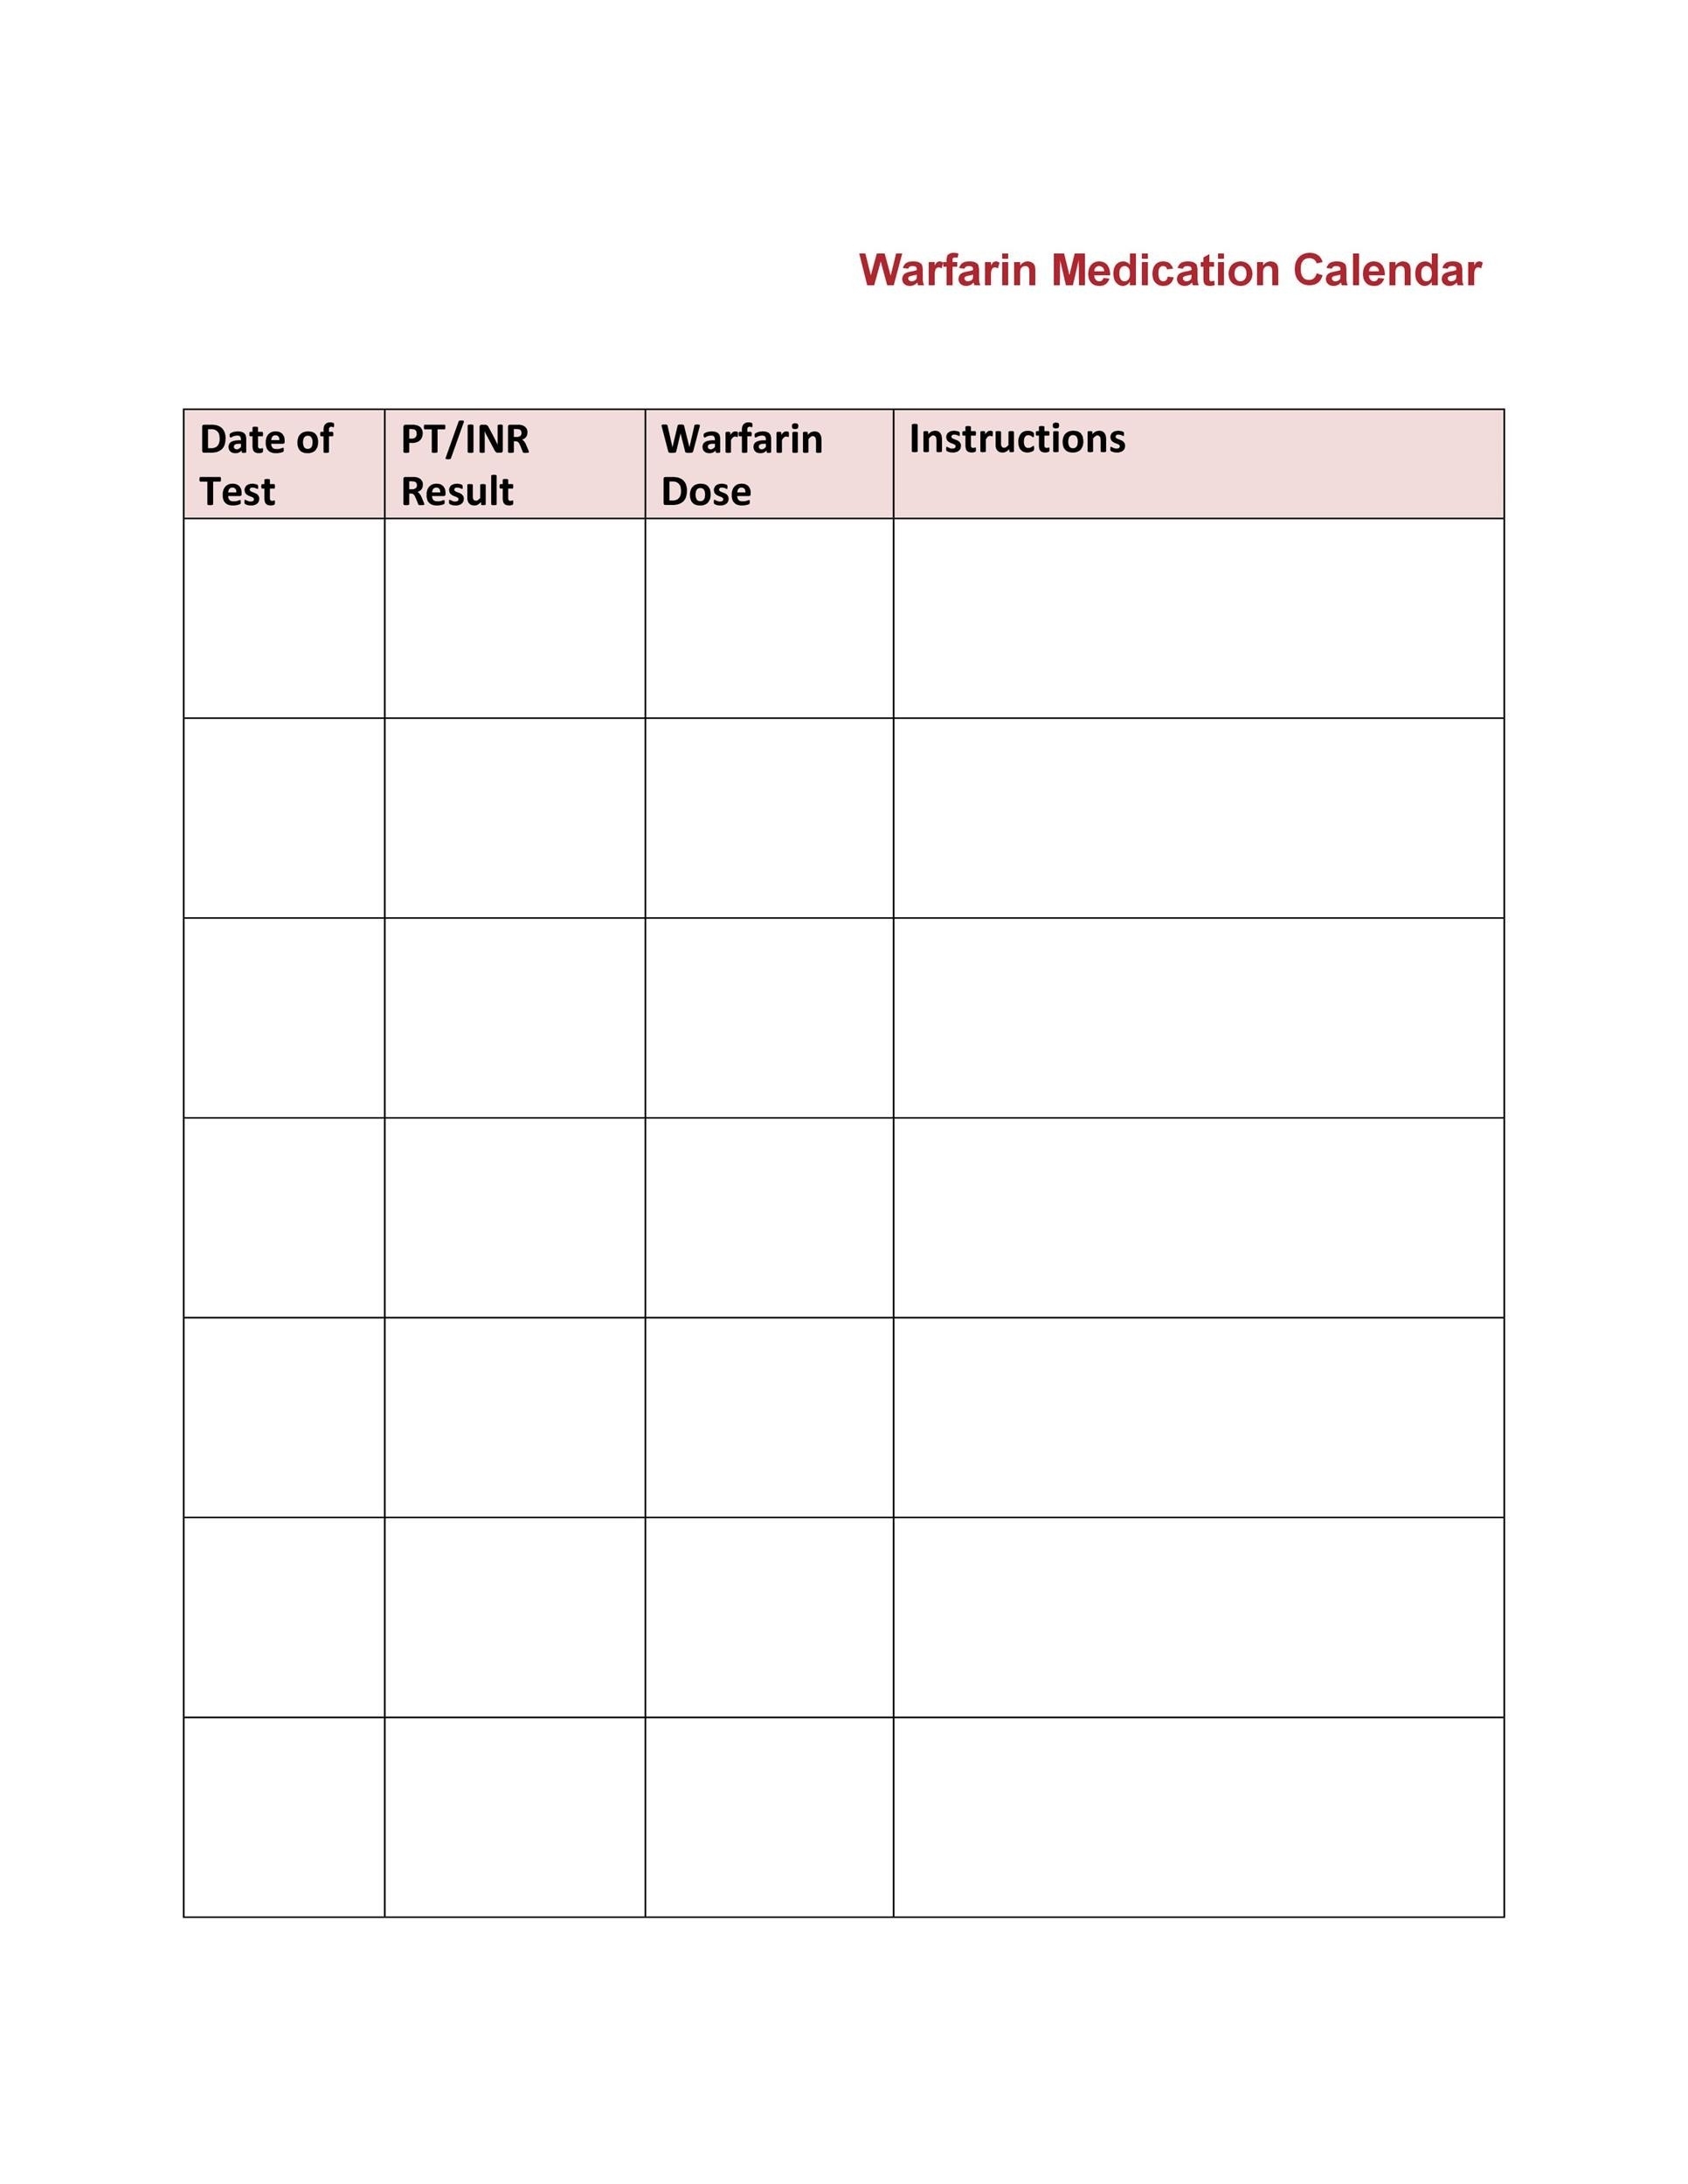 40 Great Medication Schedule Templates (+Medication Calendars) Within Blank Medication List Templates